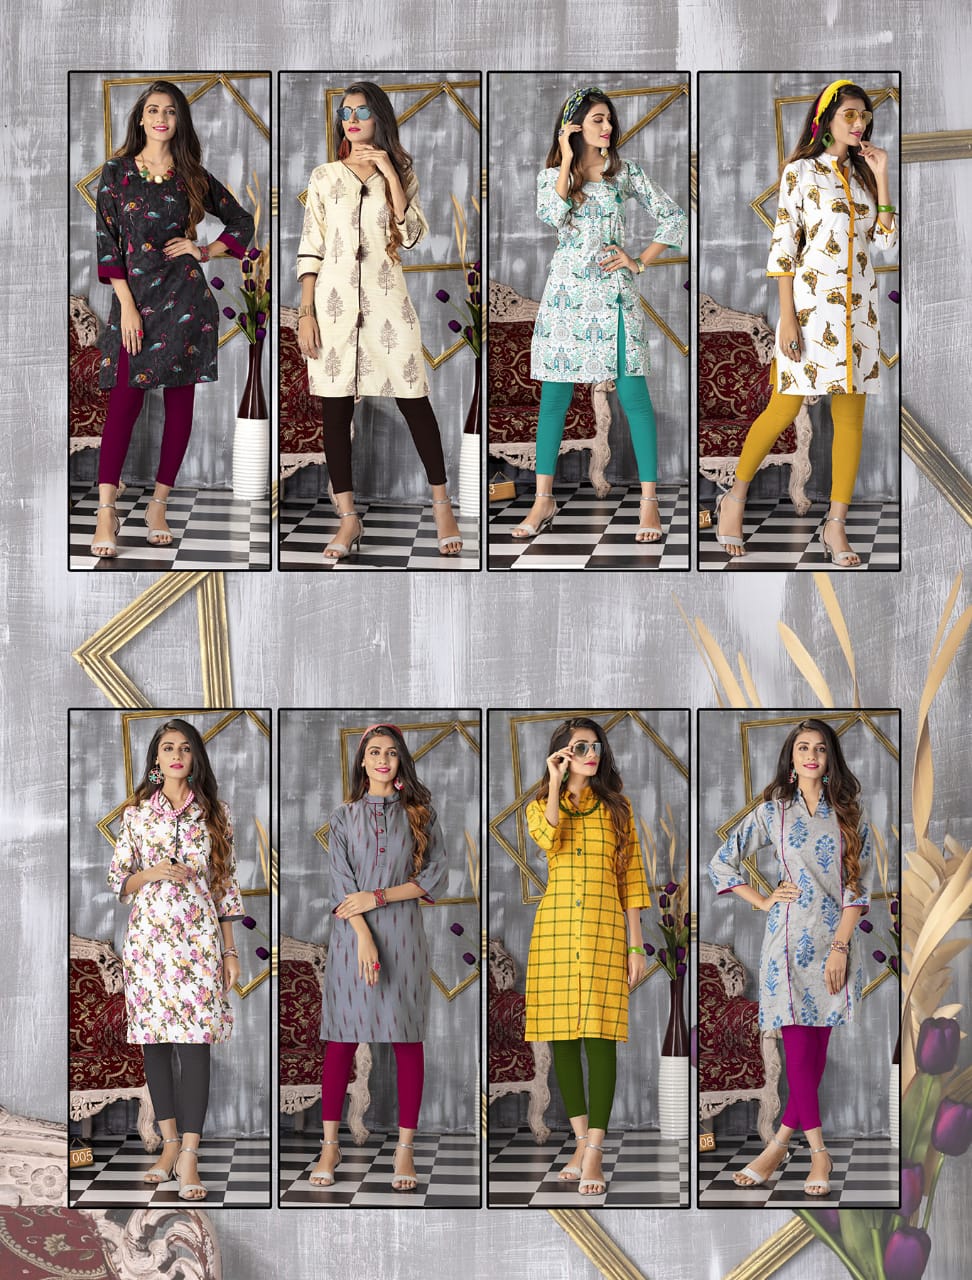 Pranjal Dezire vol 5 casual wear cotton Printed kurties collection